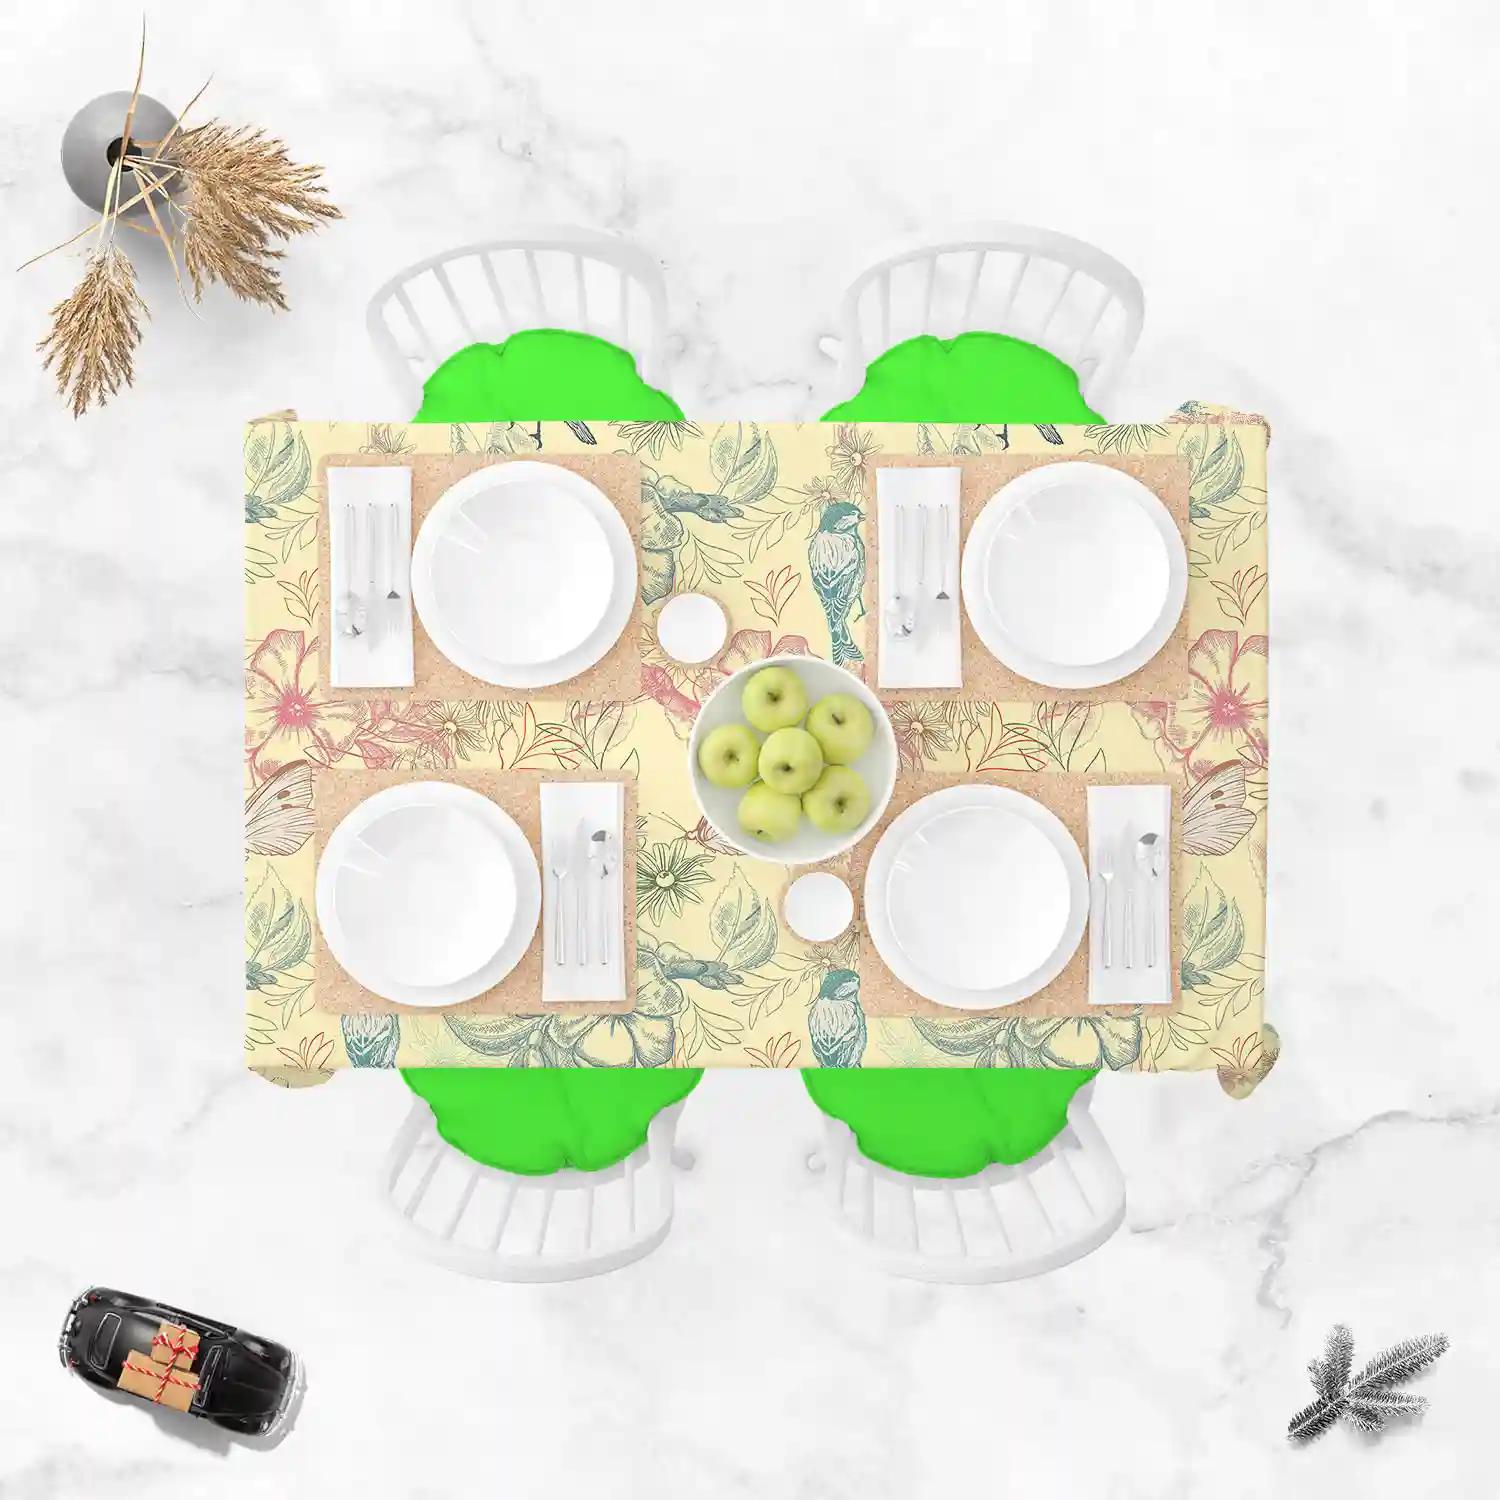 ArtzFolio Spring Flowers D4 | Table Cloth Cover for Dining & Center Table